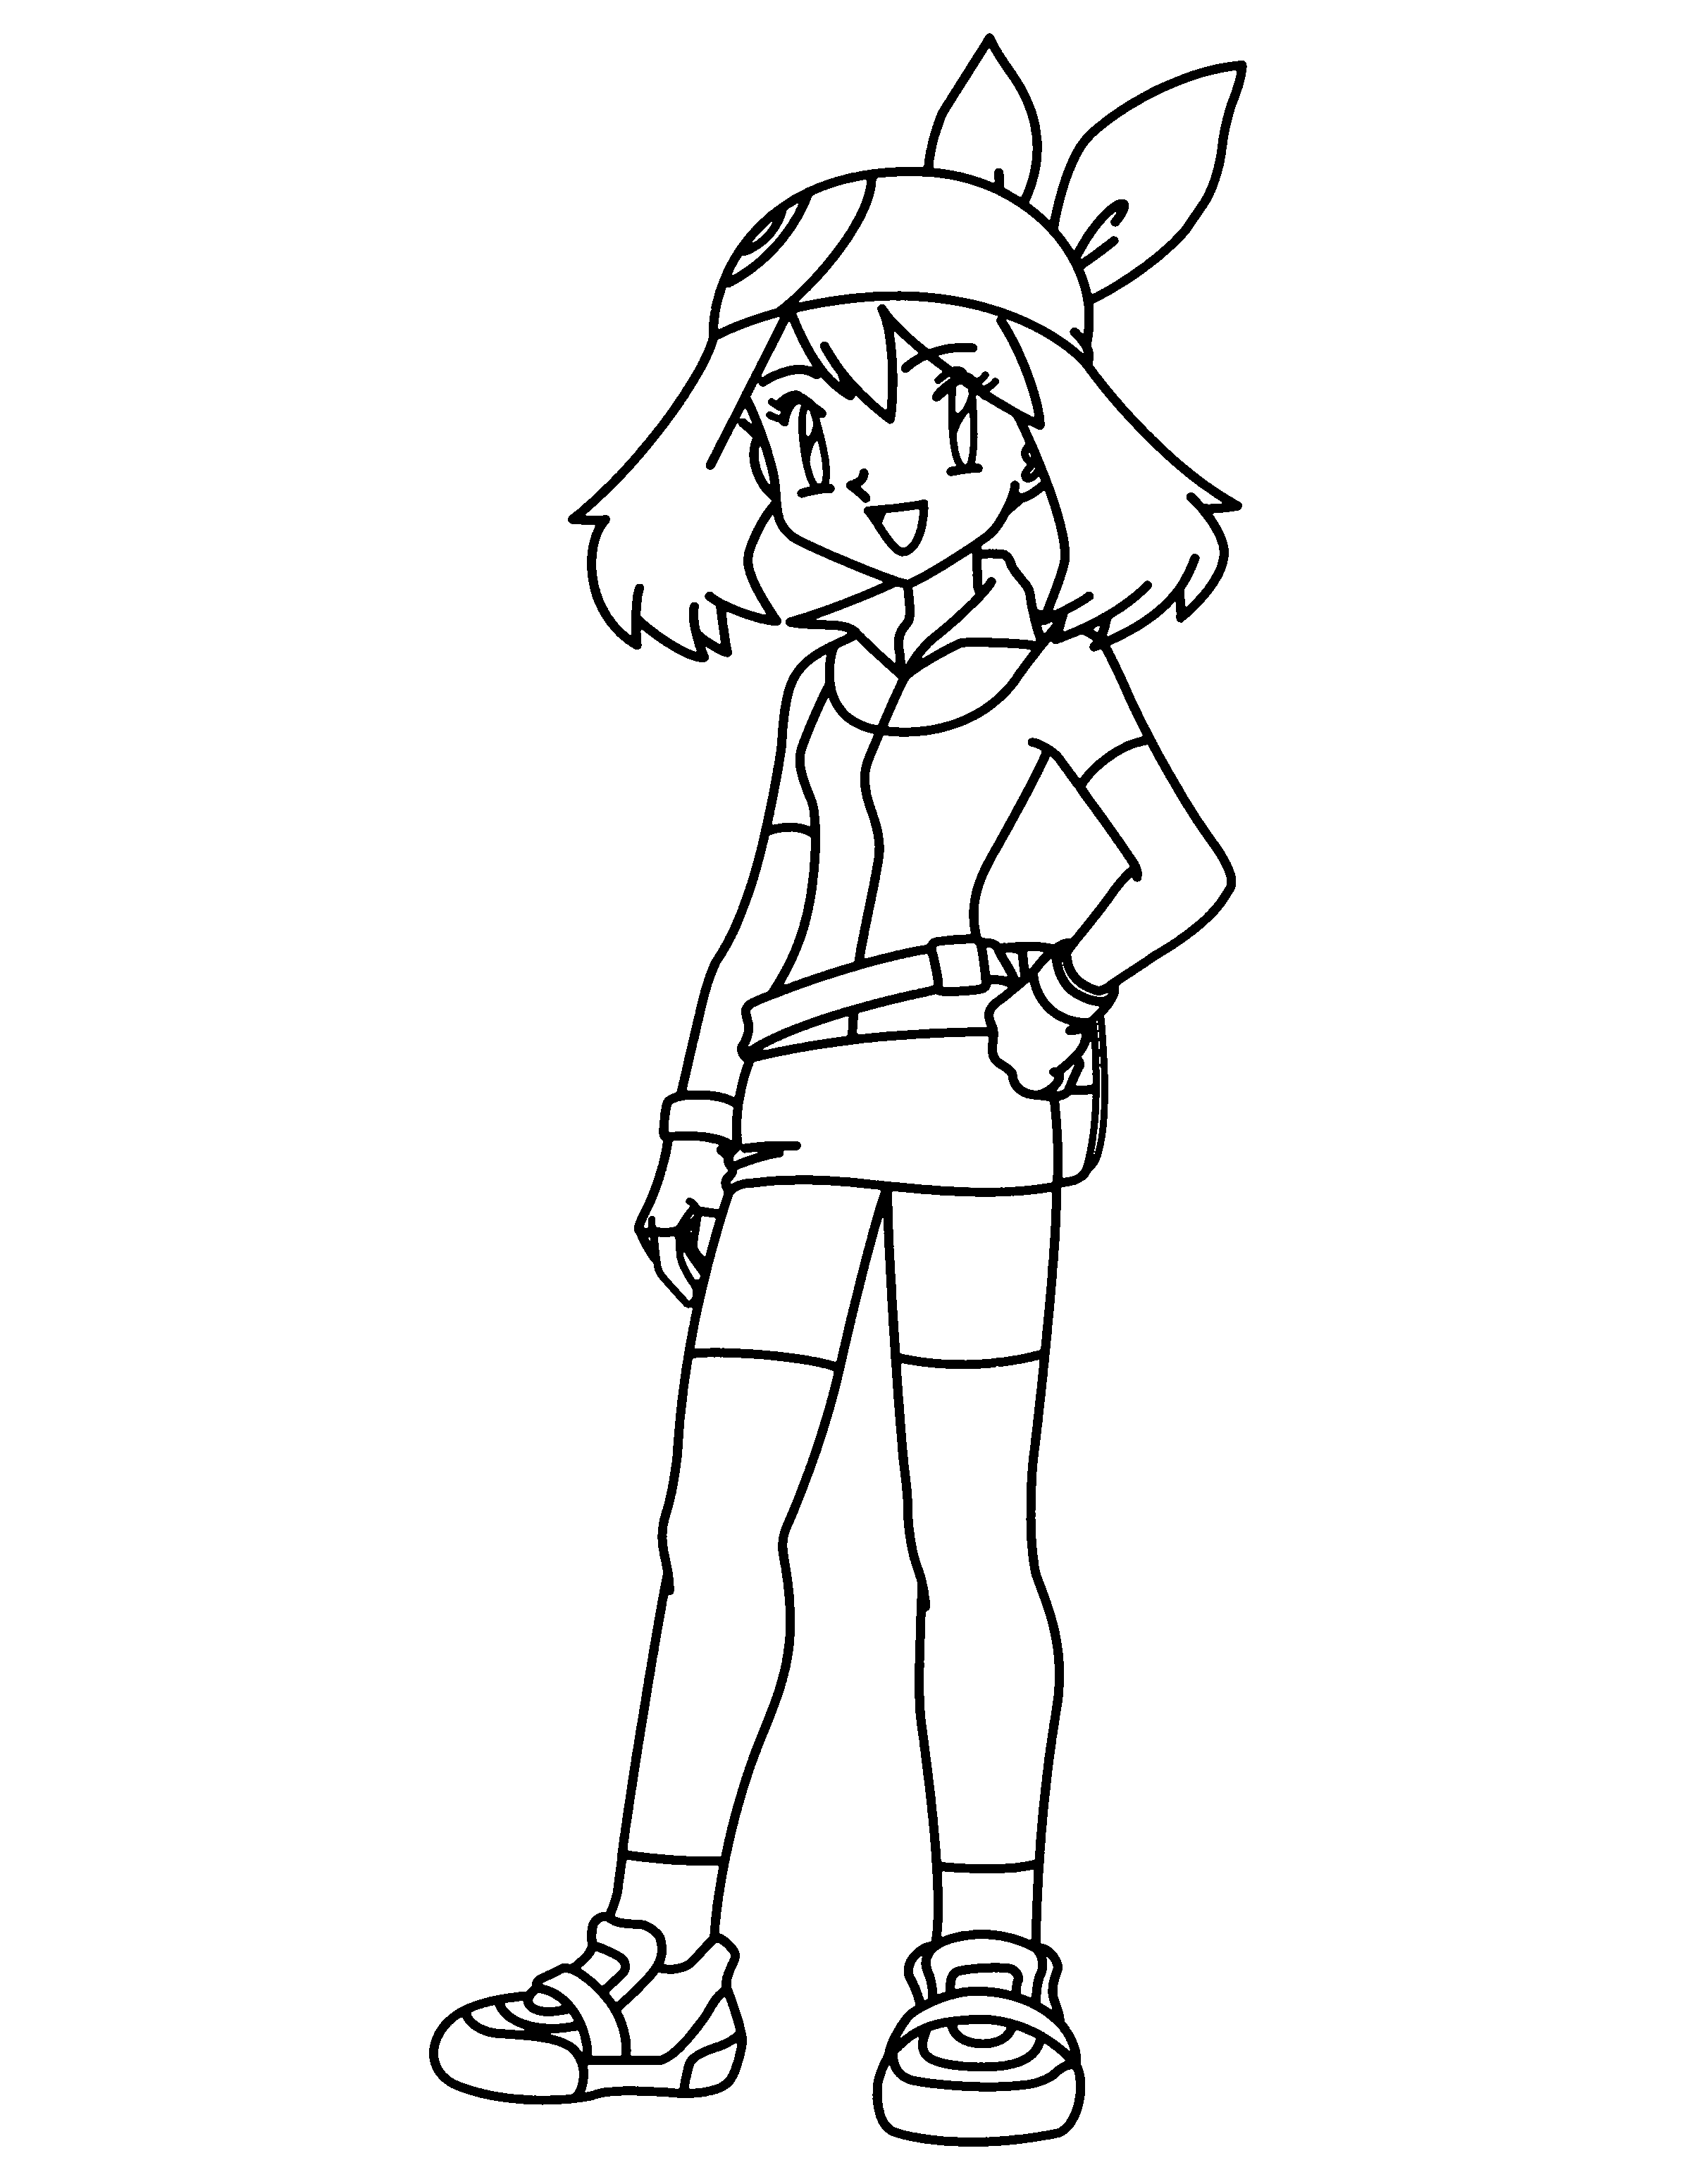 Pokemon trainer coloring pages